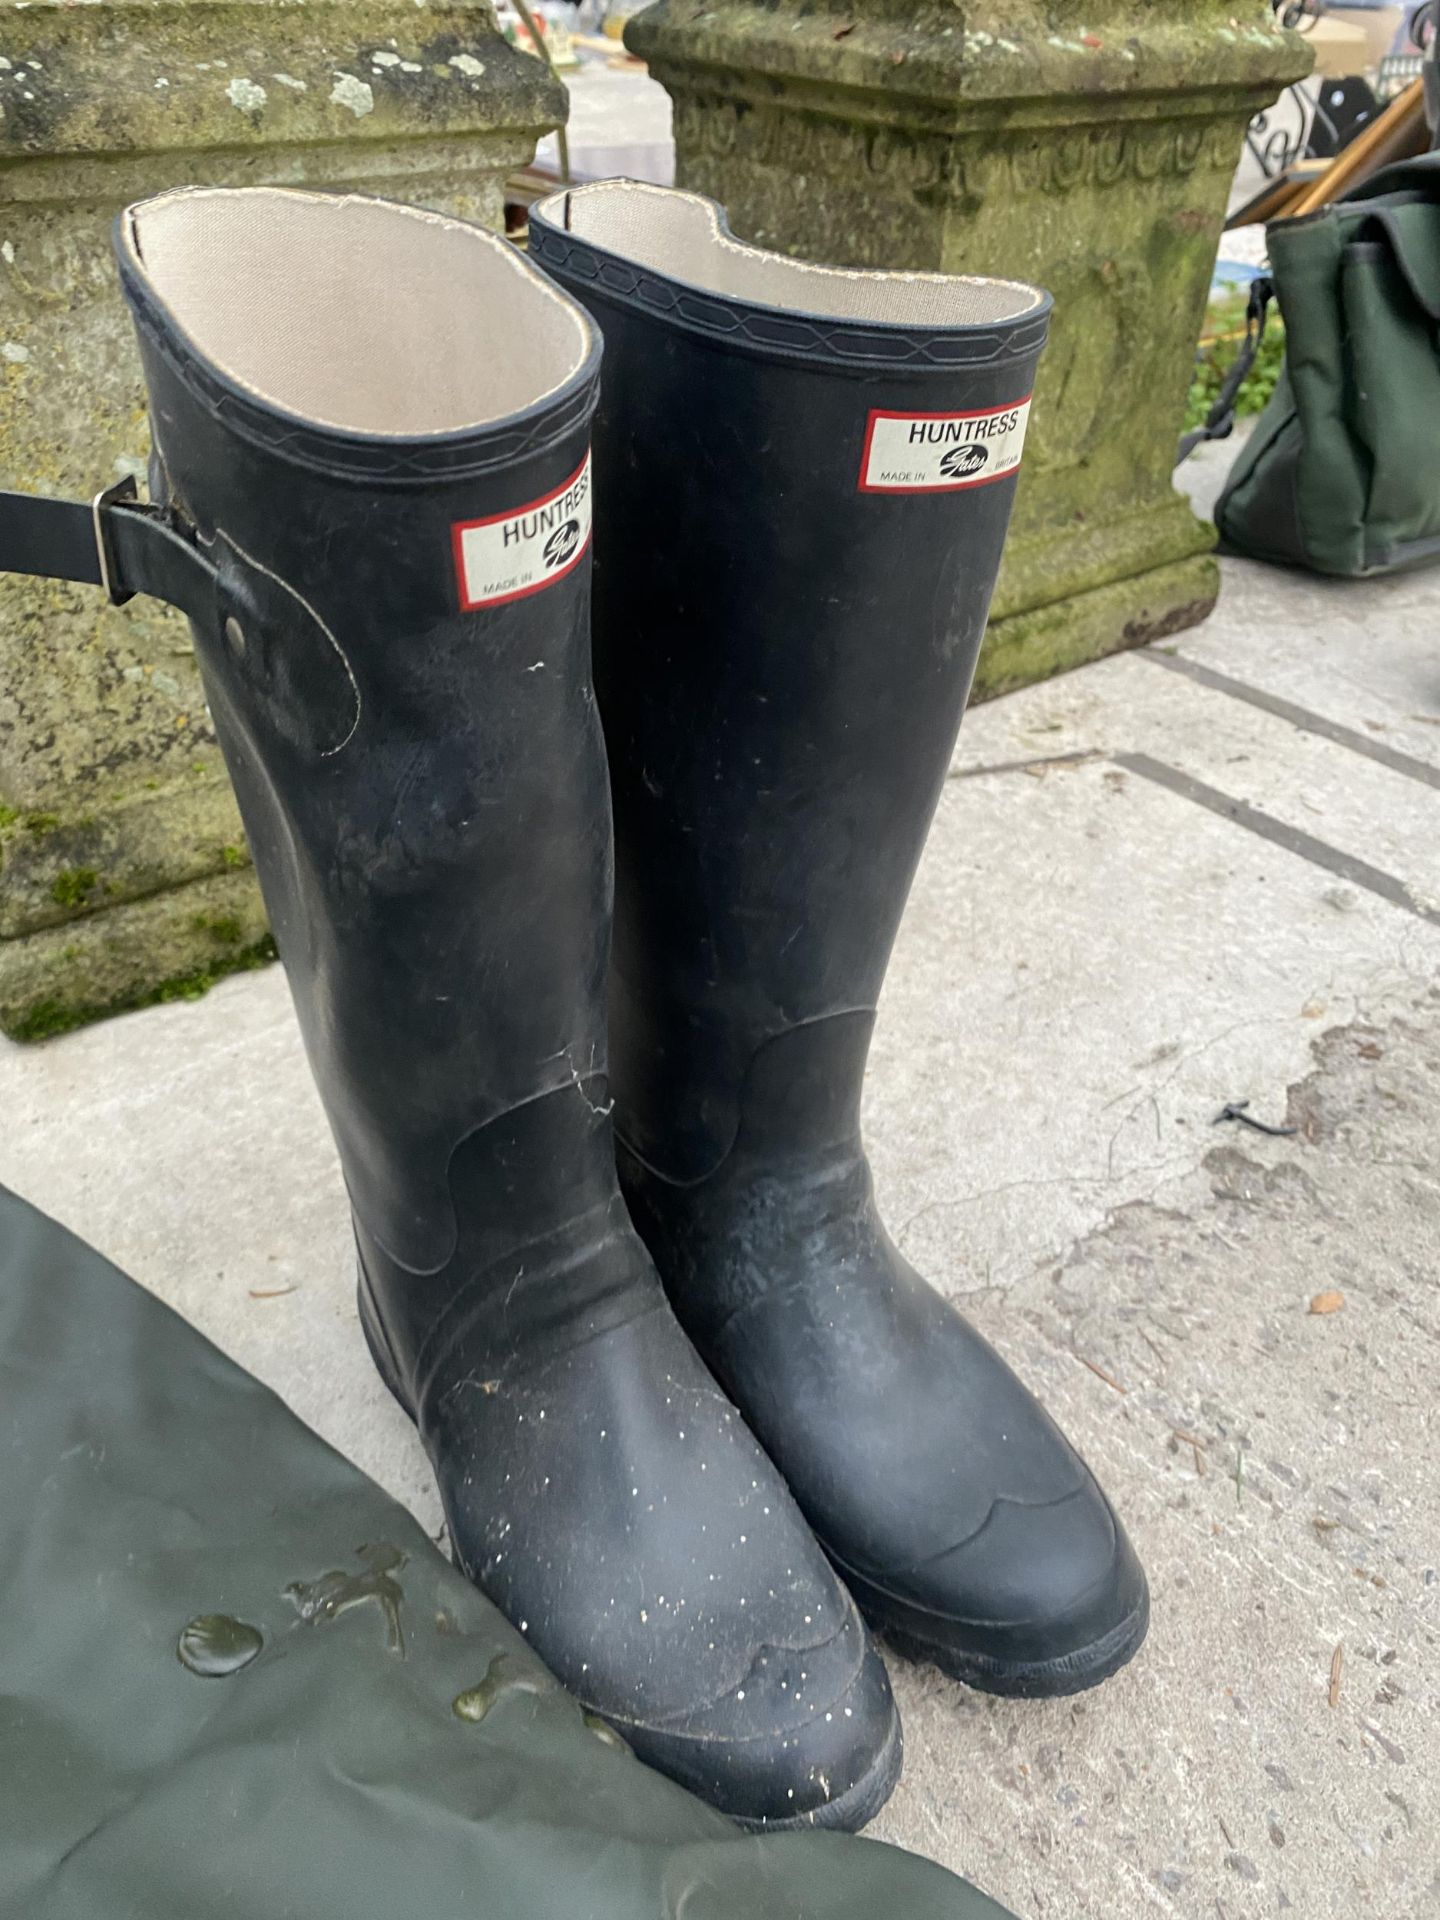 A PAIR OF BARBOUR WADERS AND A PAIR OF HUNTER WELLIES - Image 2 of 3